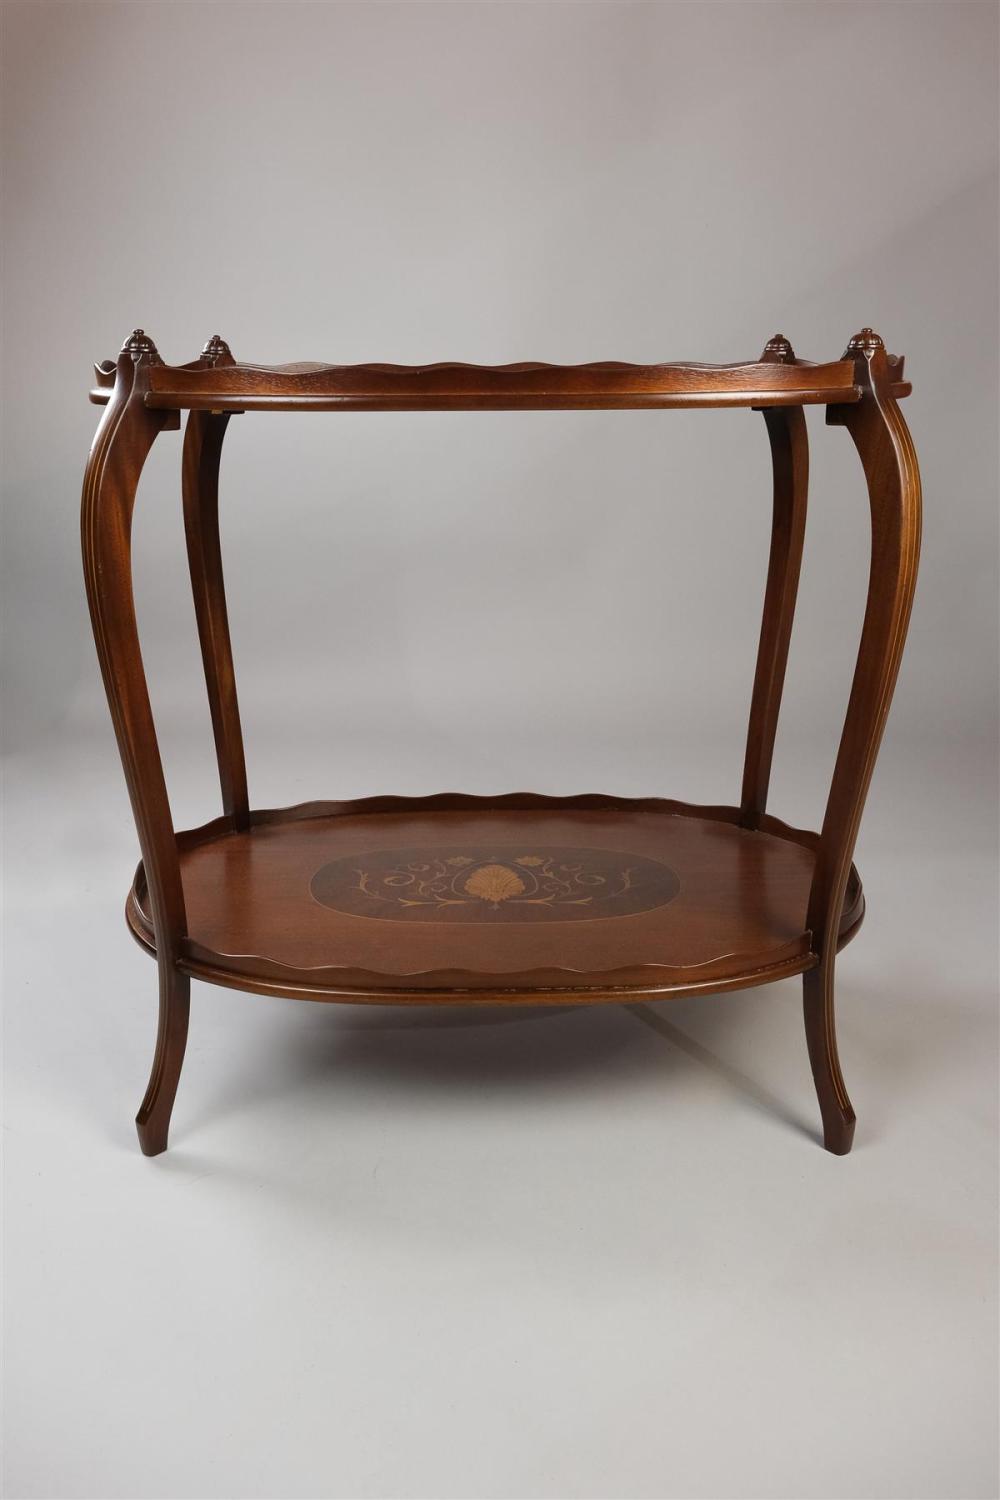 ART NOUVEAU INLAID TWO-TIER TRAY TABLEART